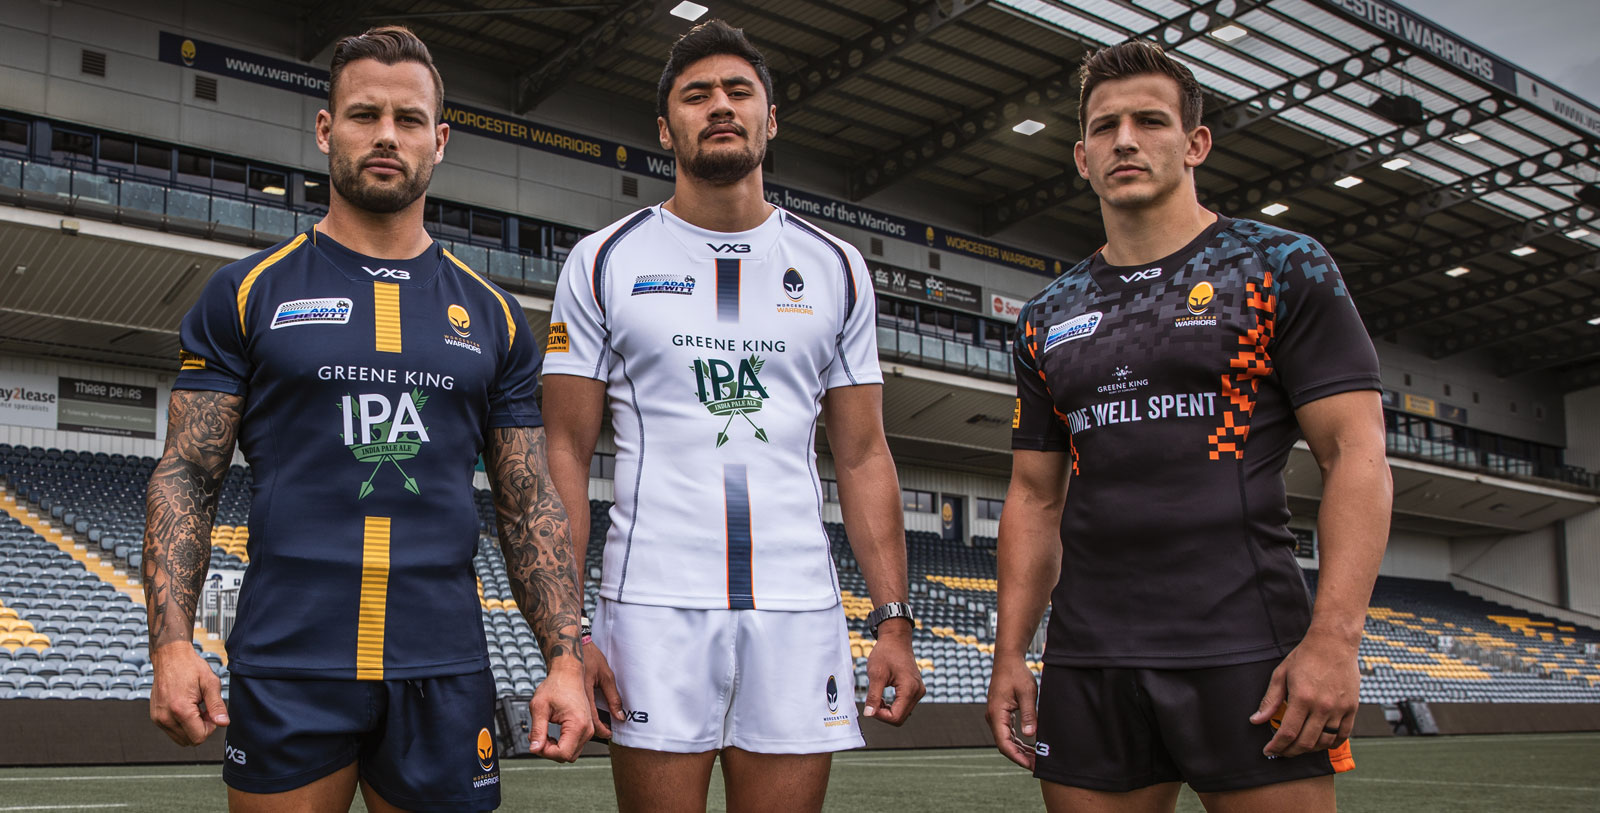 Worcester Warriors unveil new shirts for 2019-20 season